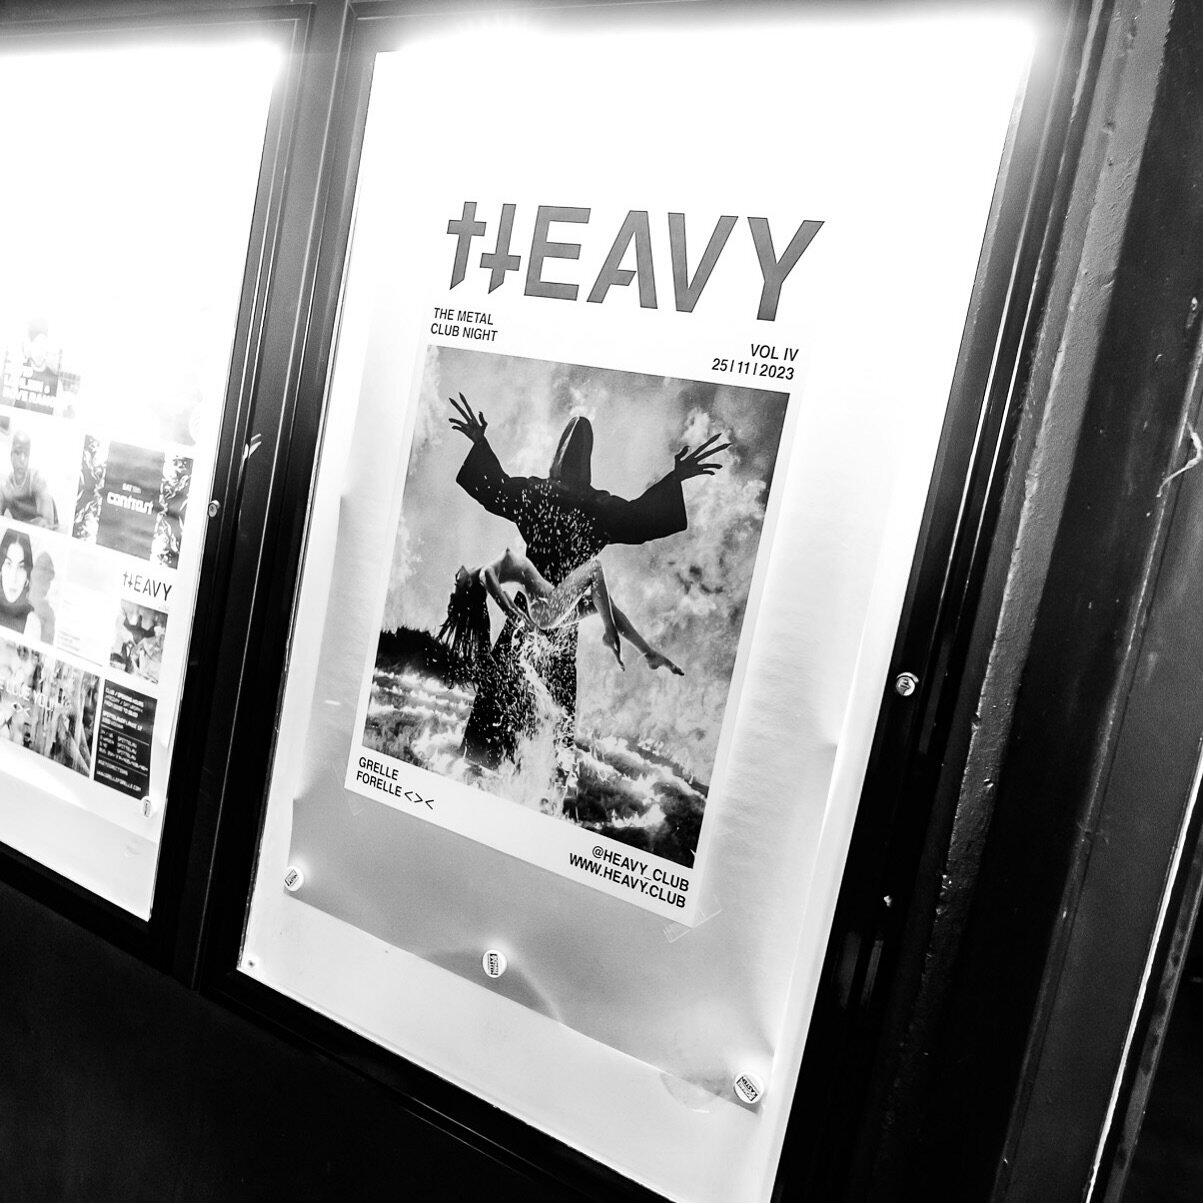 ++ ALL PHOTOS ARE ONLINE ++ 
What a night! 🤘 ++ Check out the @heavy_club VOL IV gallery ++ www.heavy.club ++

📷 @nachtfrostvisuals